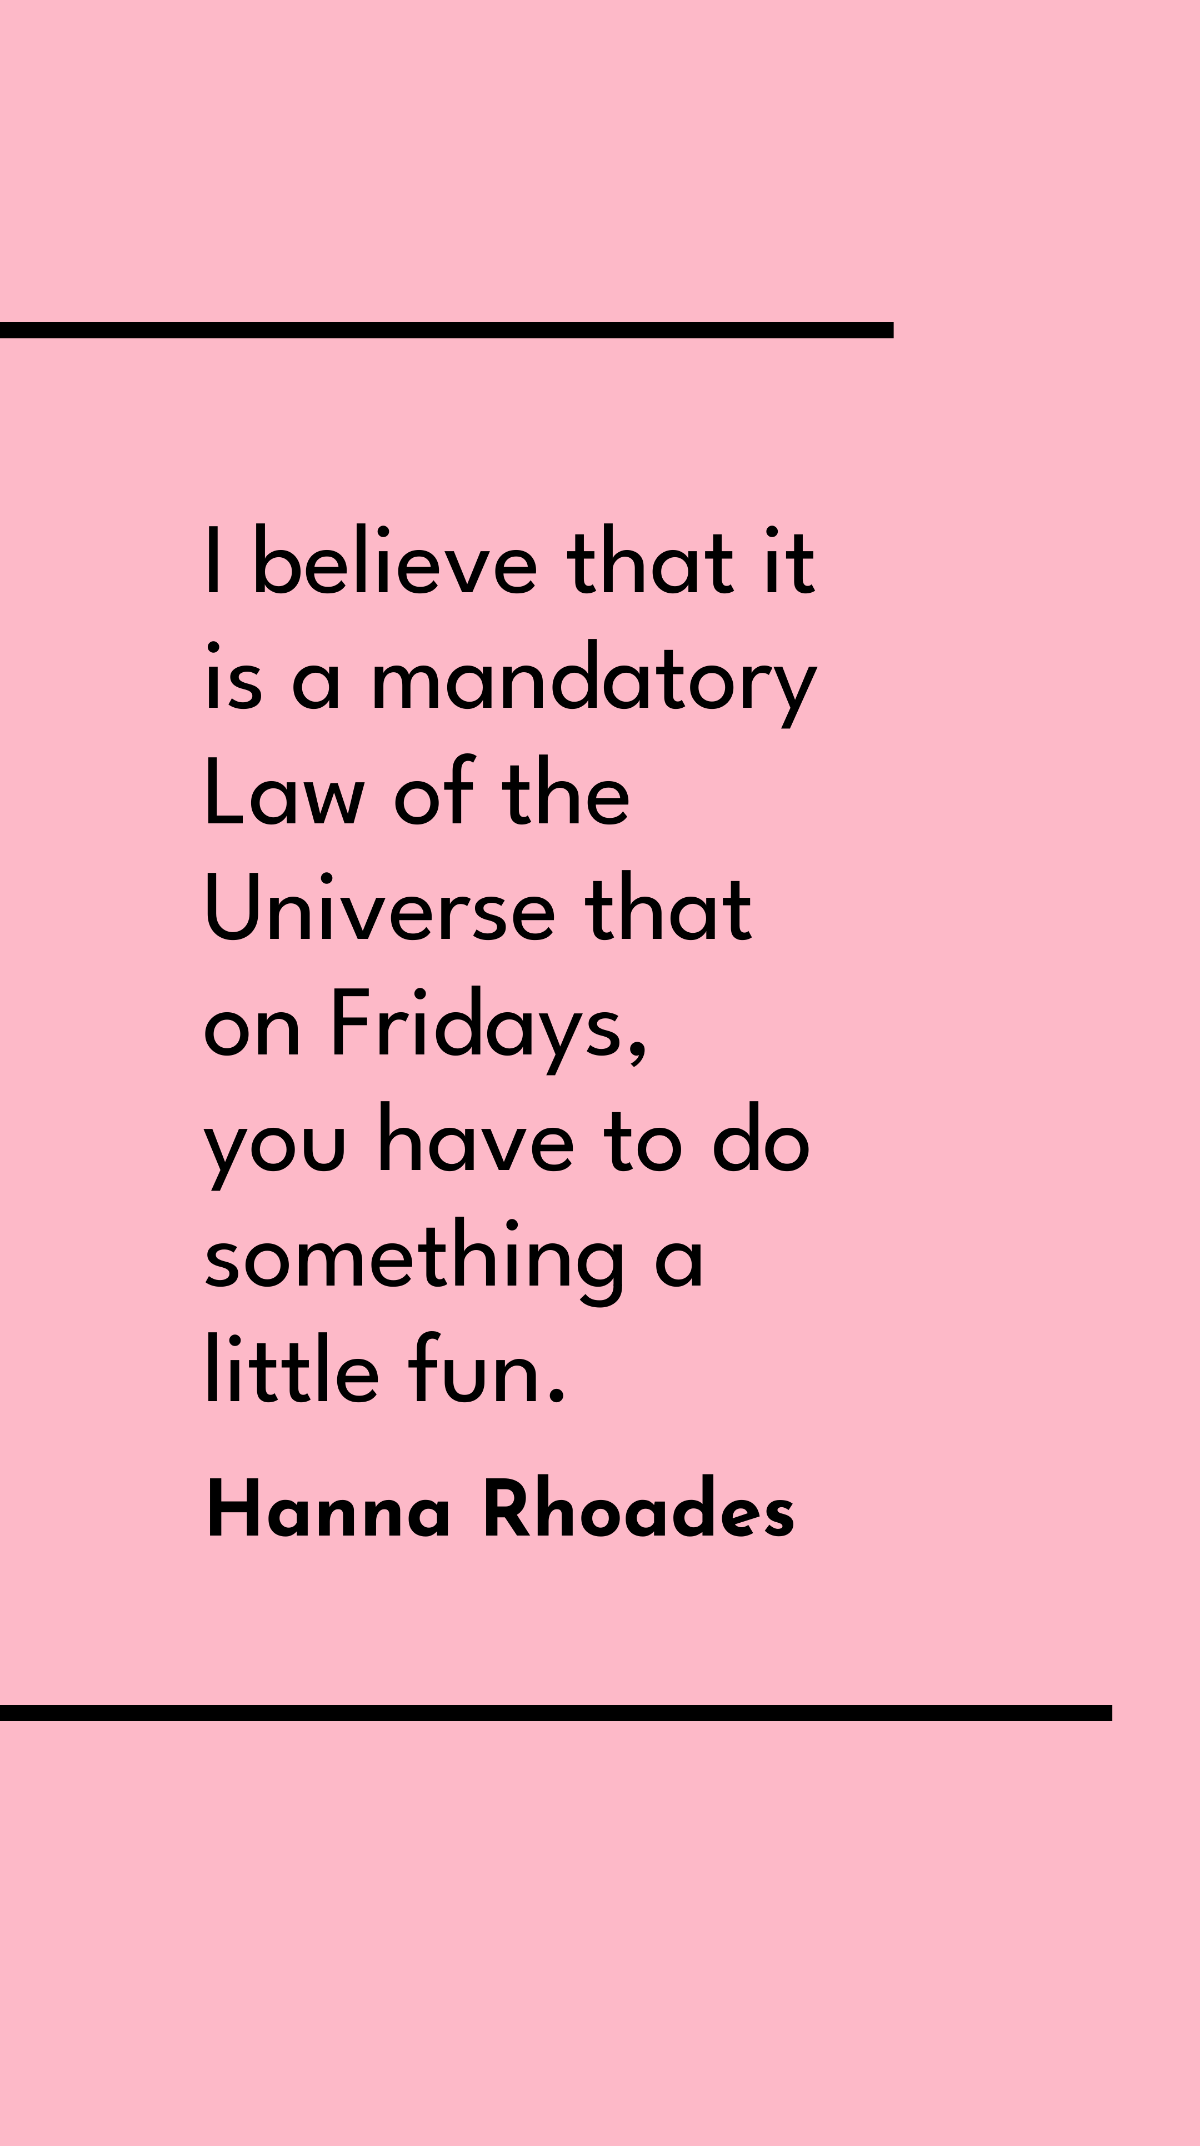 Hanna Rhoades - I believe that it is a mandatory Law of the Universe that on Fridays, you have to do something a little fun.  Template